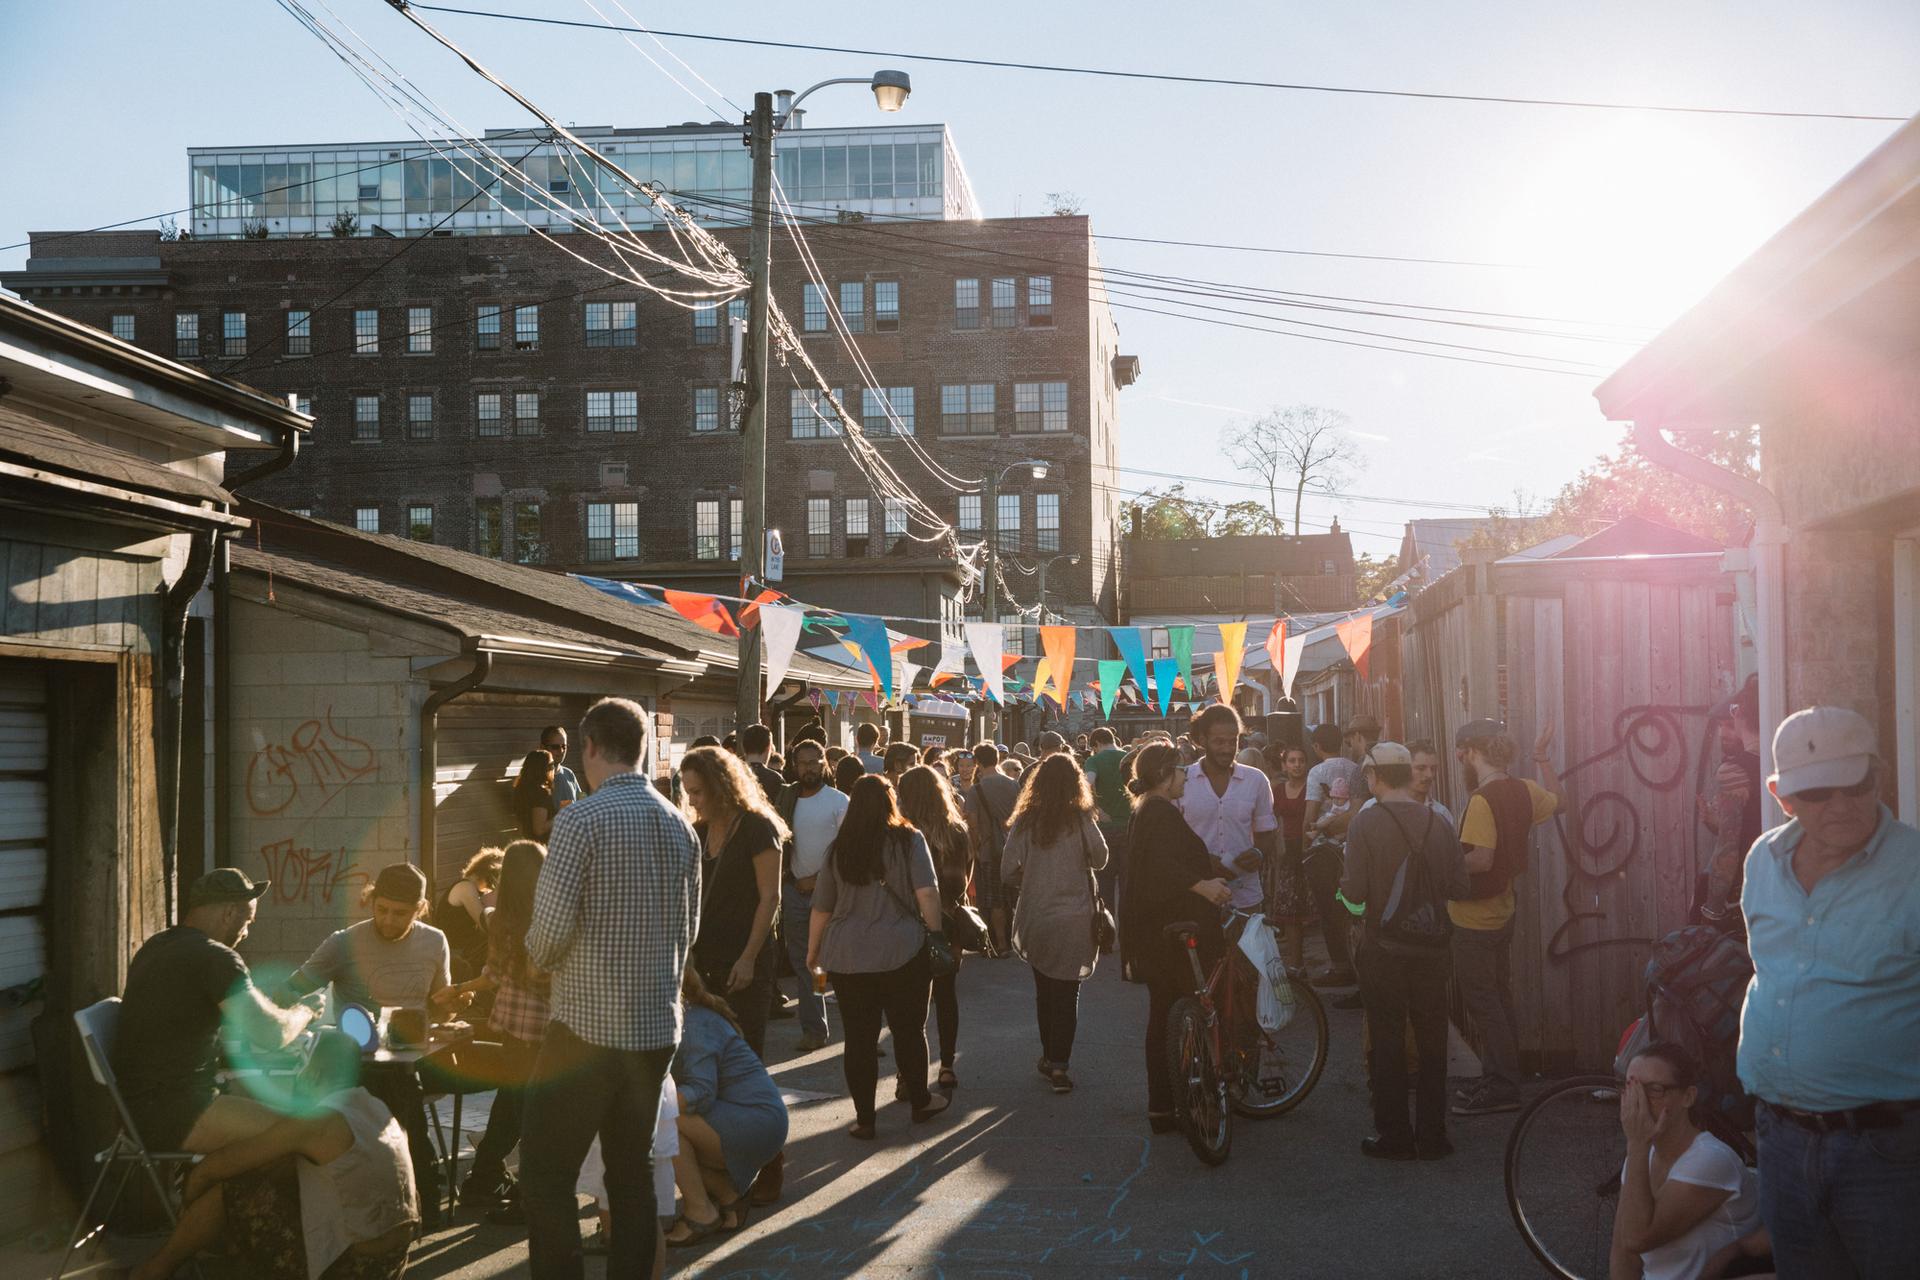 Outdoor markets and food trucks